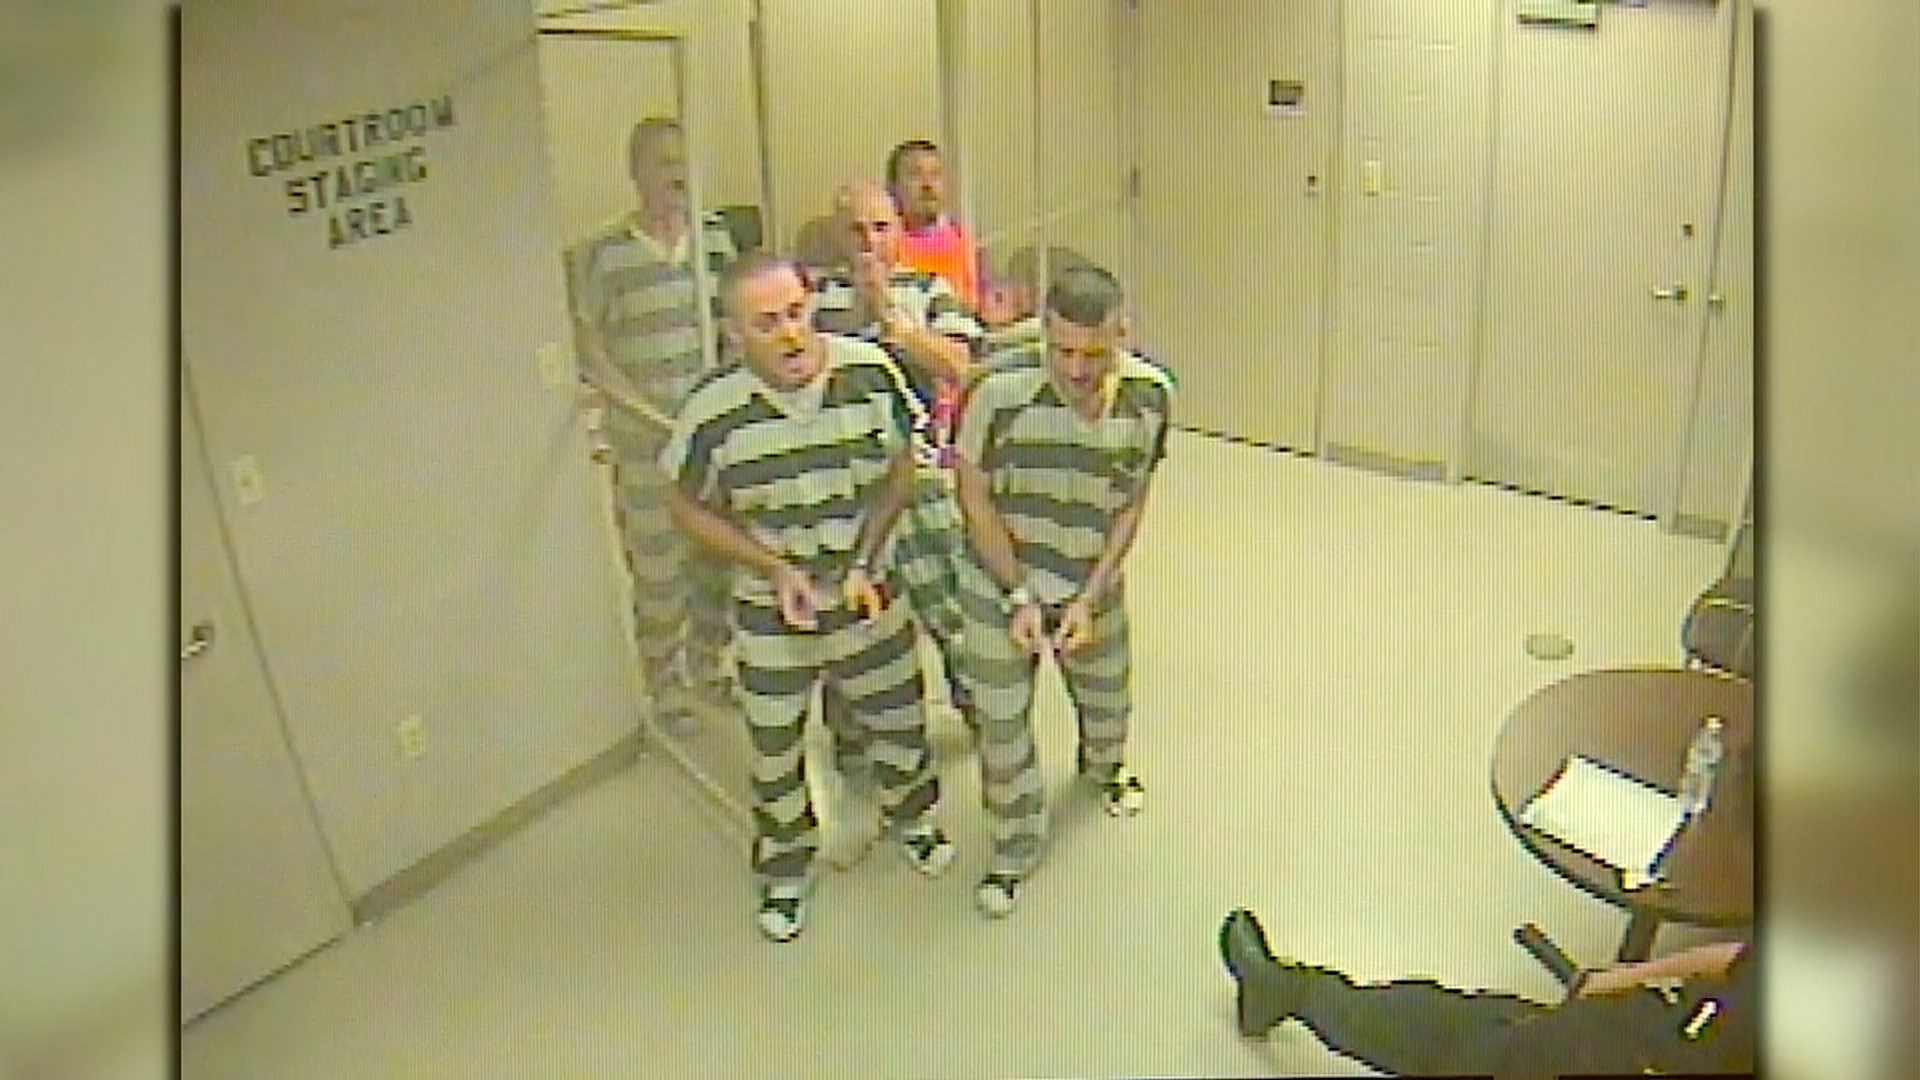 Inmates Break Out Of Cell And Risk Lives To Save Dying Prison Guard